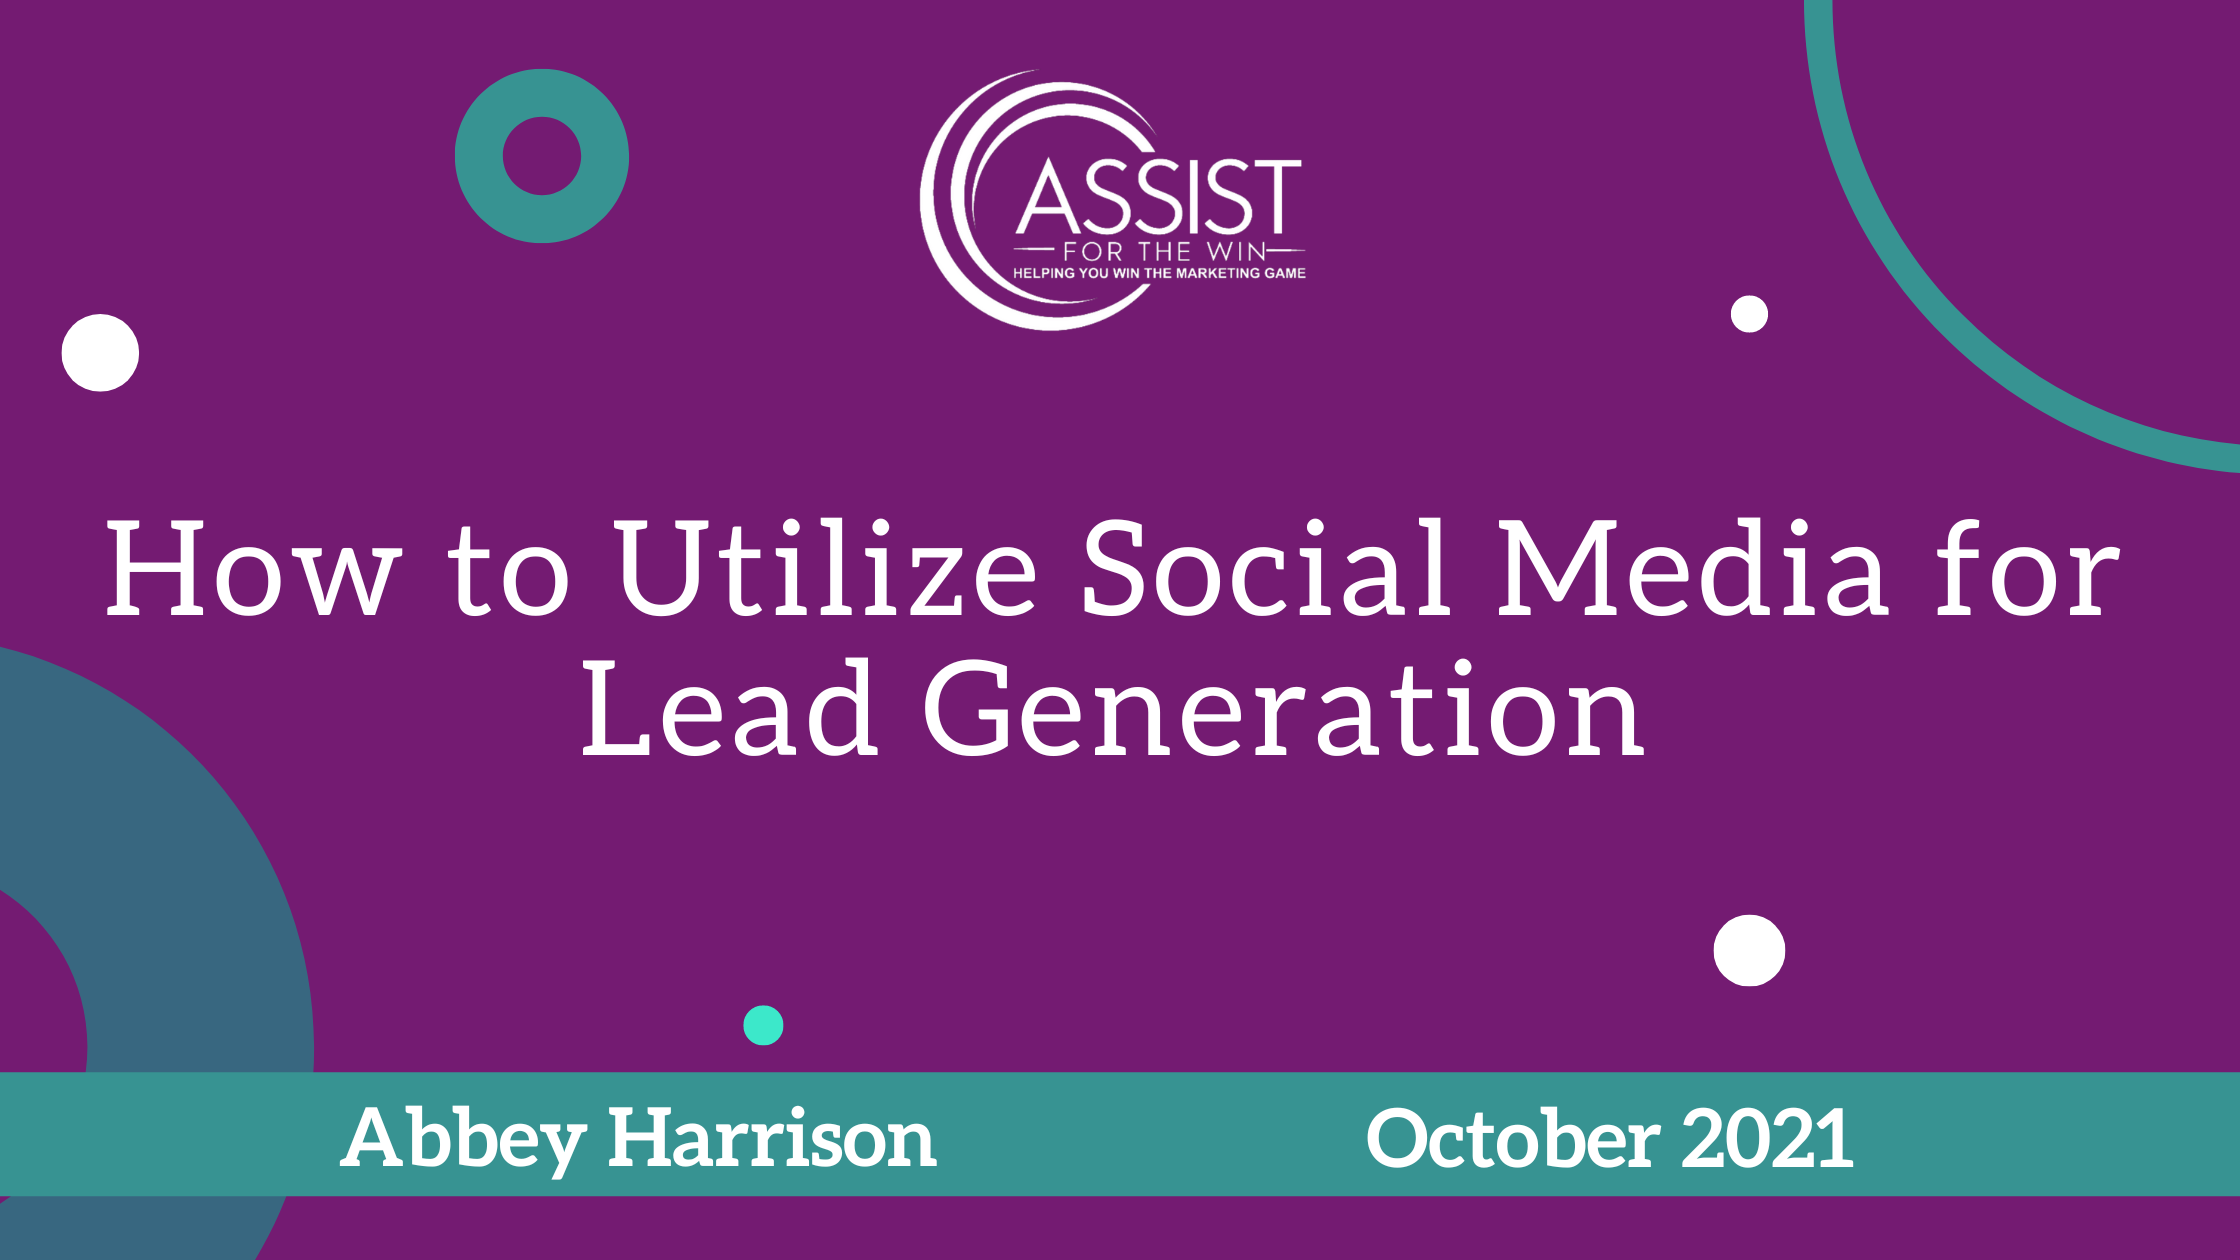 How to Utilize Social Media for Lead Generation